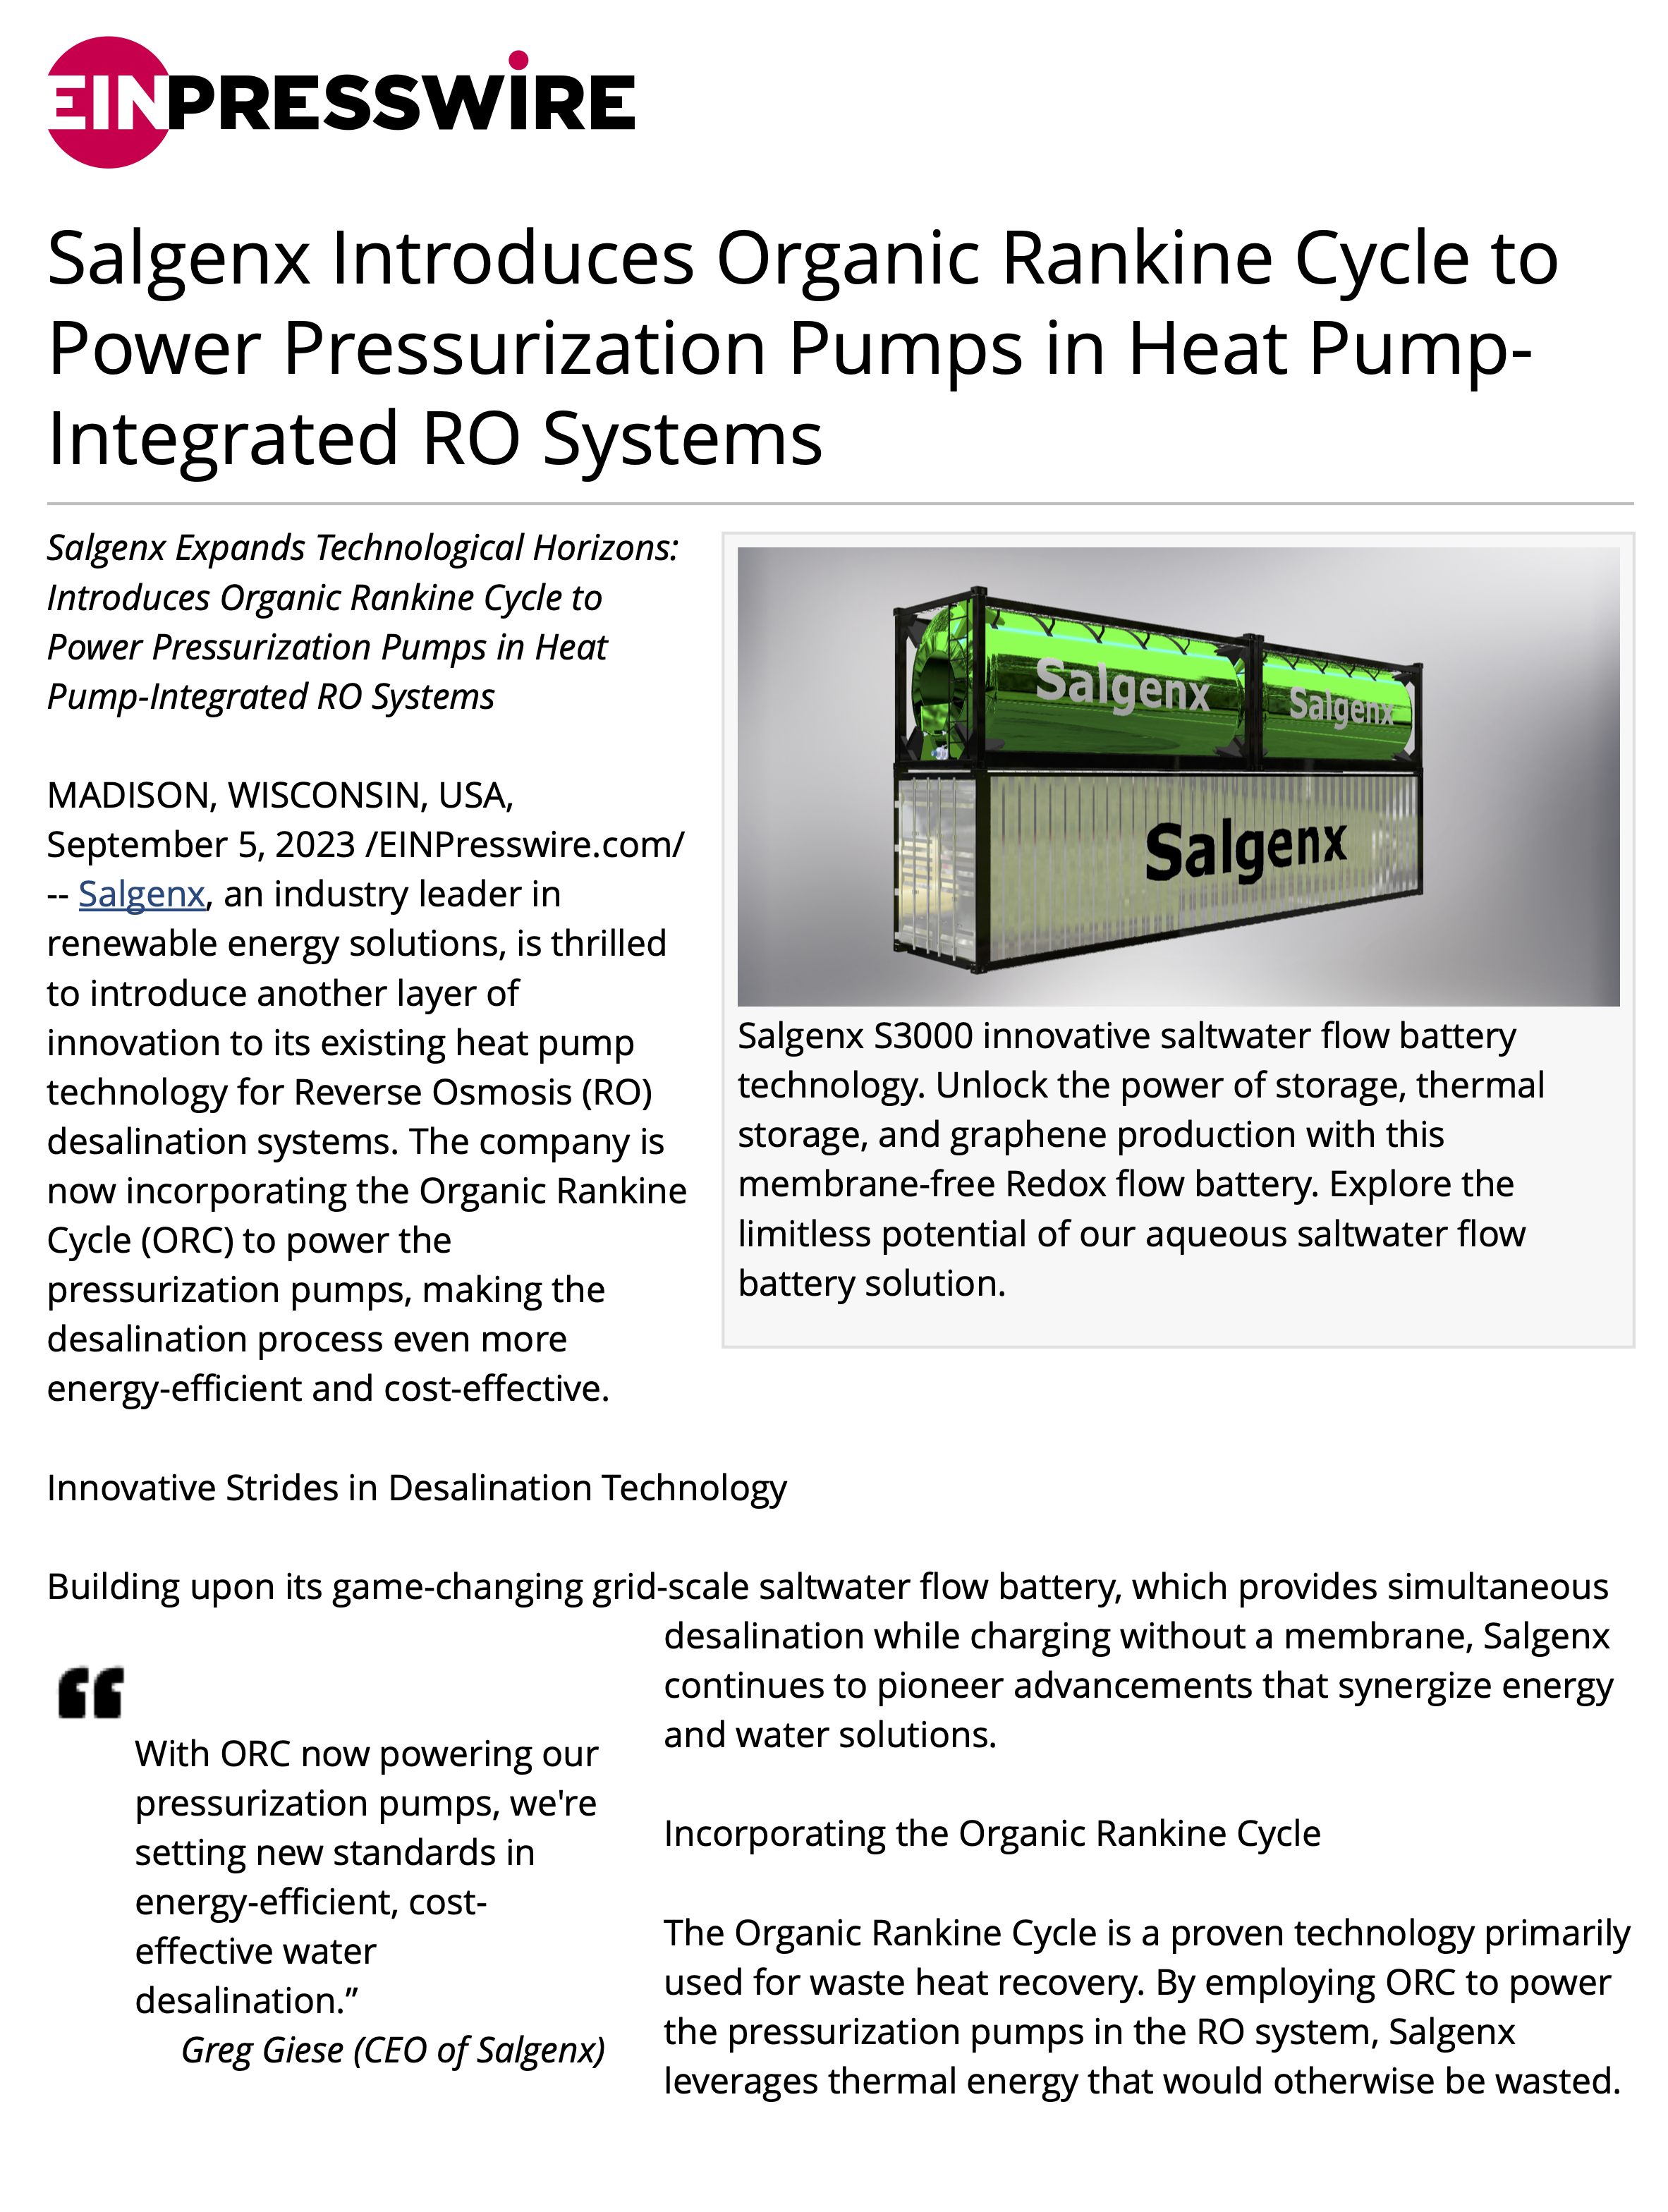 Salgenx Introduces Organic Rankine Cycle to Power Pressurization Pumps in Heat Pump- Integrated RO Systems